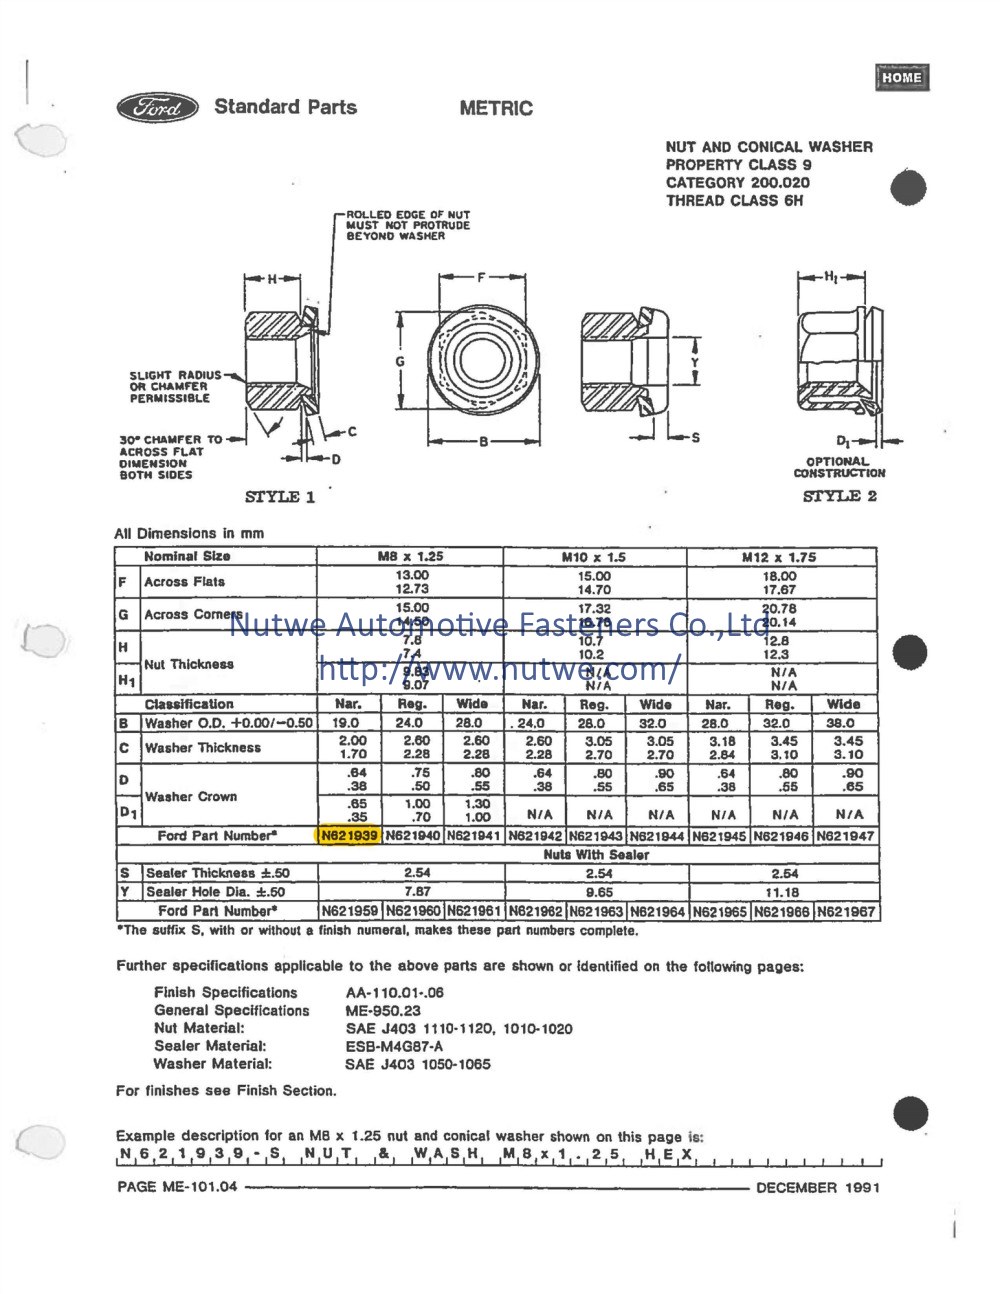 Ford N621941 Hexagon Nuts With Conical Washer Engineer Drawing and Technical Data Sheet